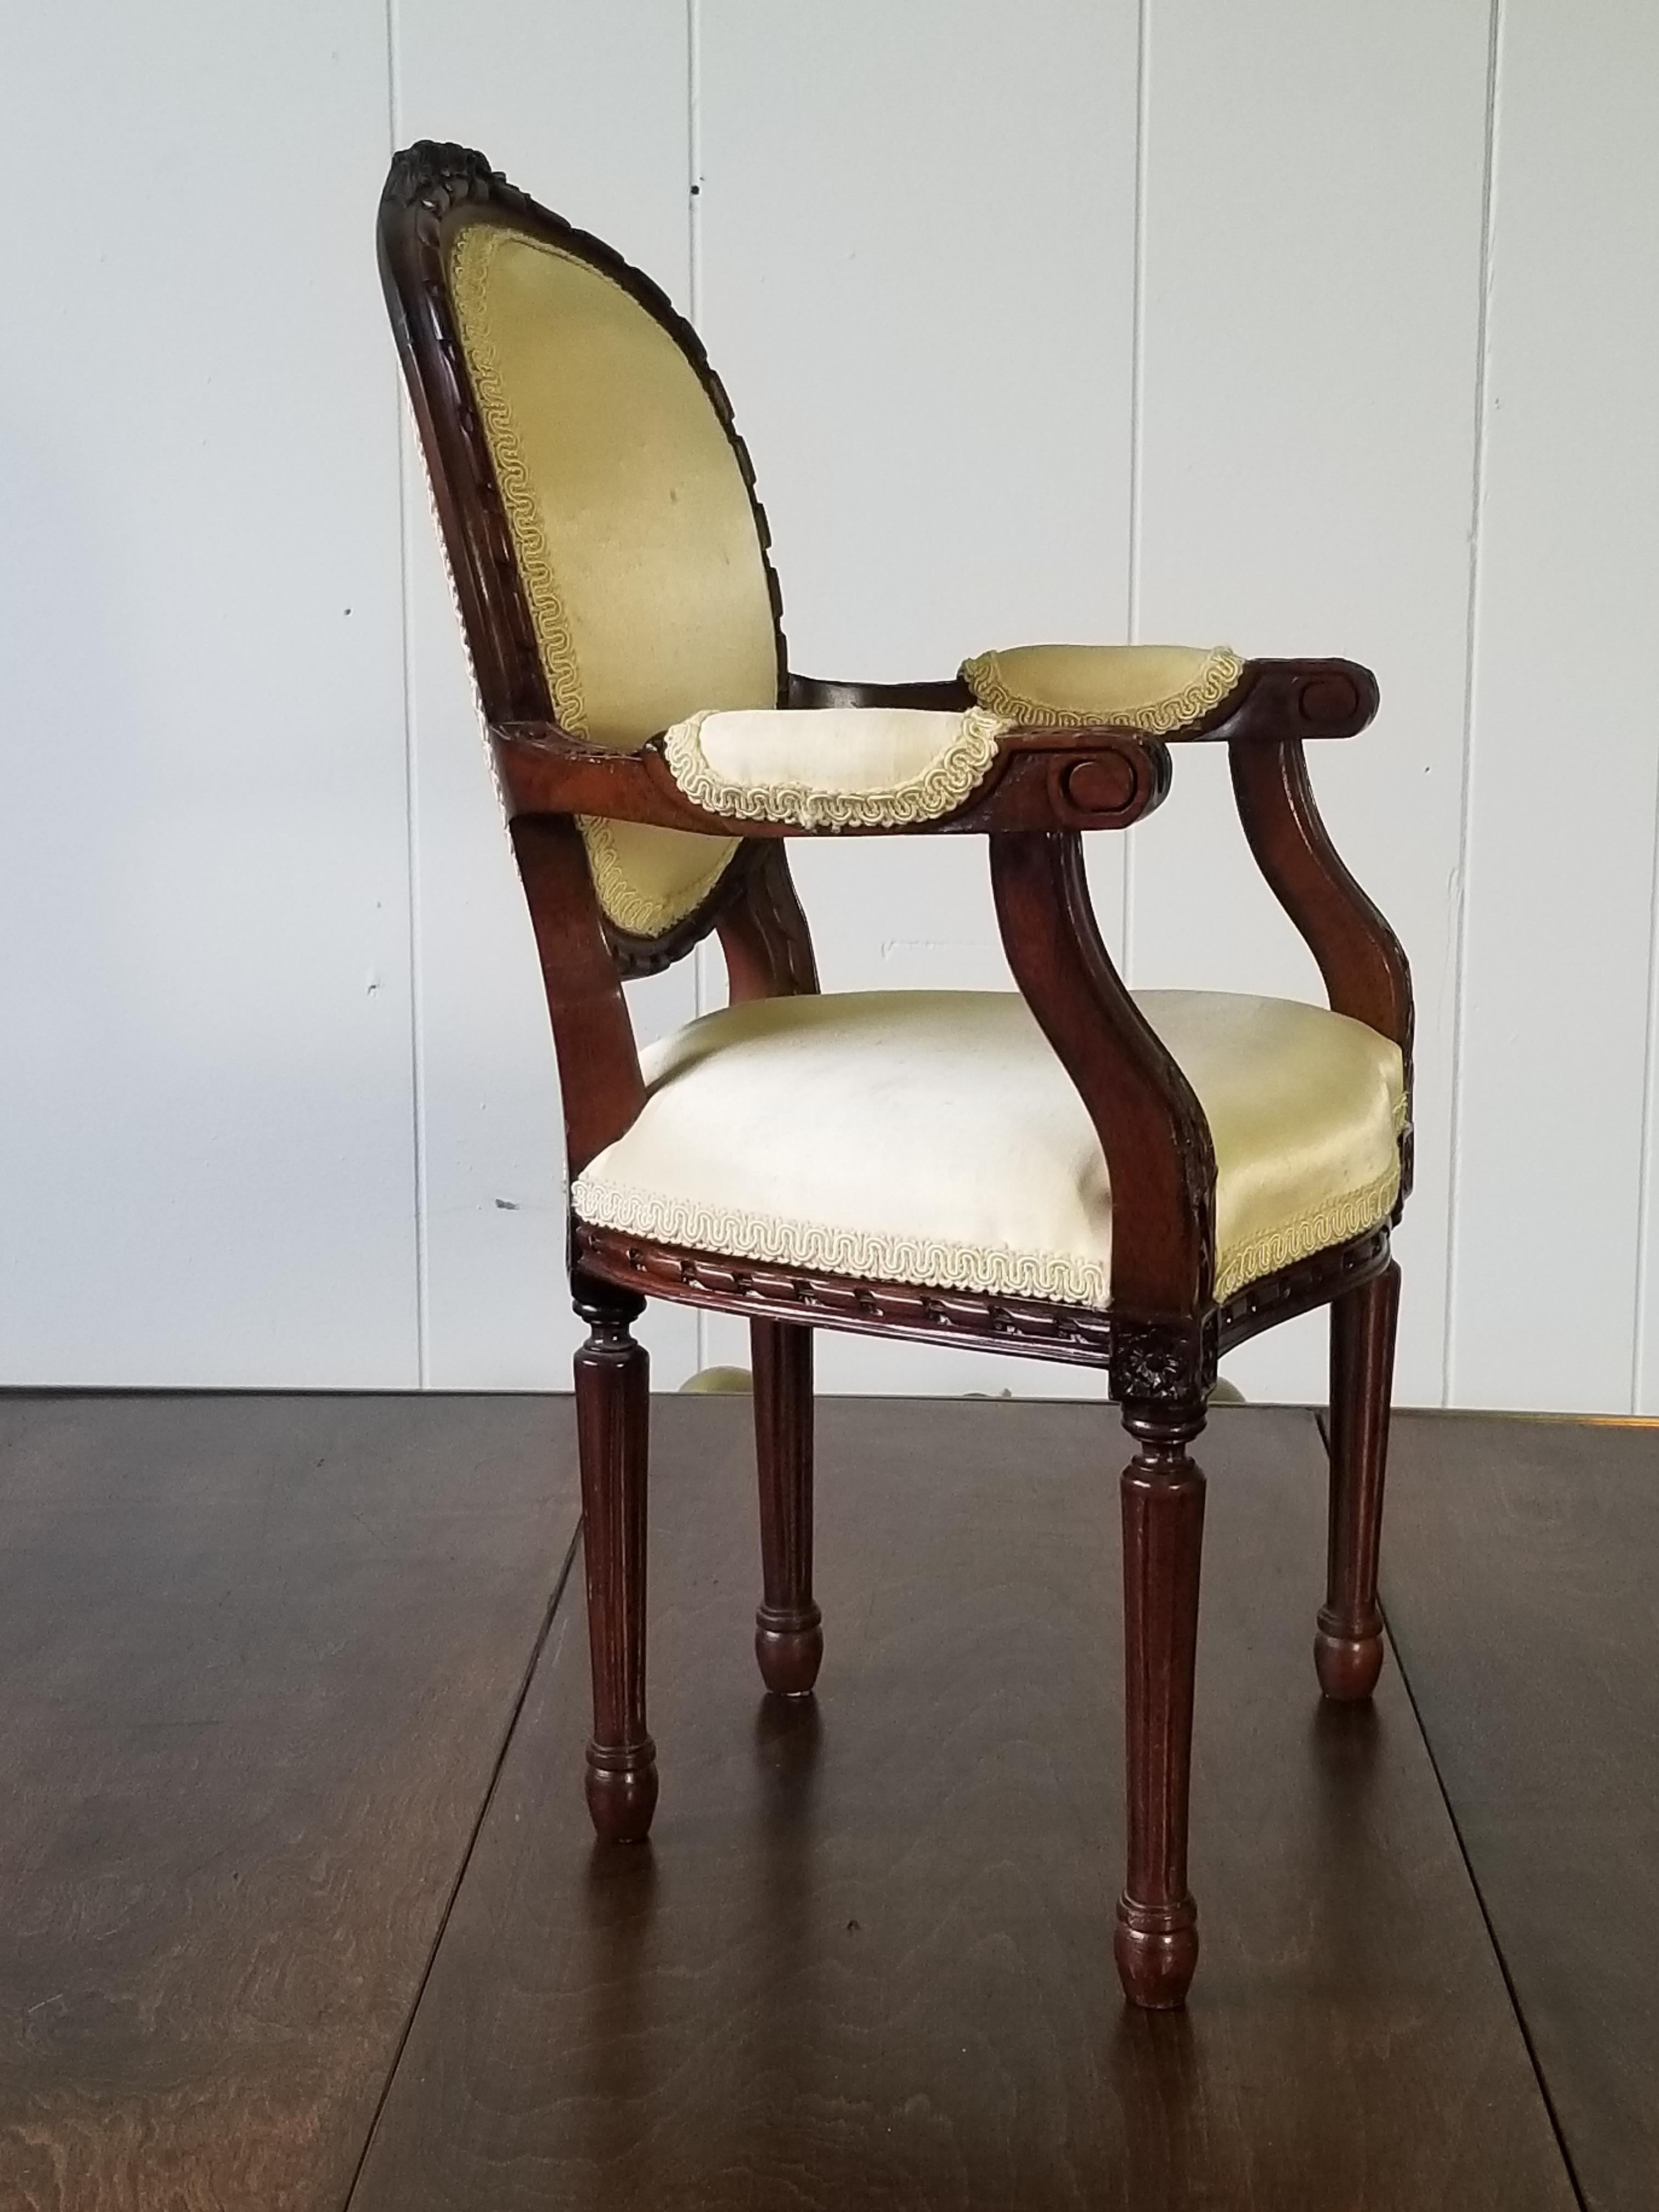 20th century antique reproduction miniature fauteuil made in the French Louis XVI style. The armchair has an oval back carved with ribbon detail and a bowknot at the crest. The arms scroll down to carved rosettes and a ribbon carved apron. The chair